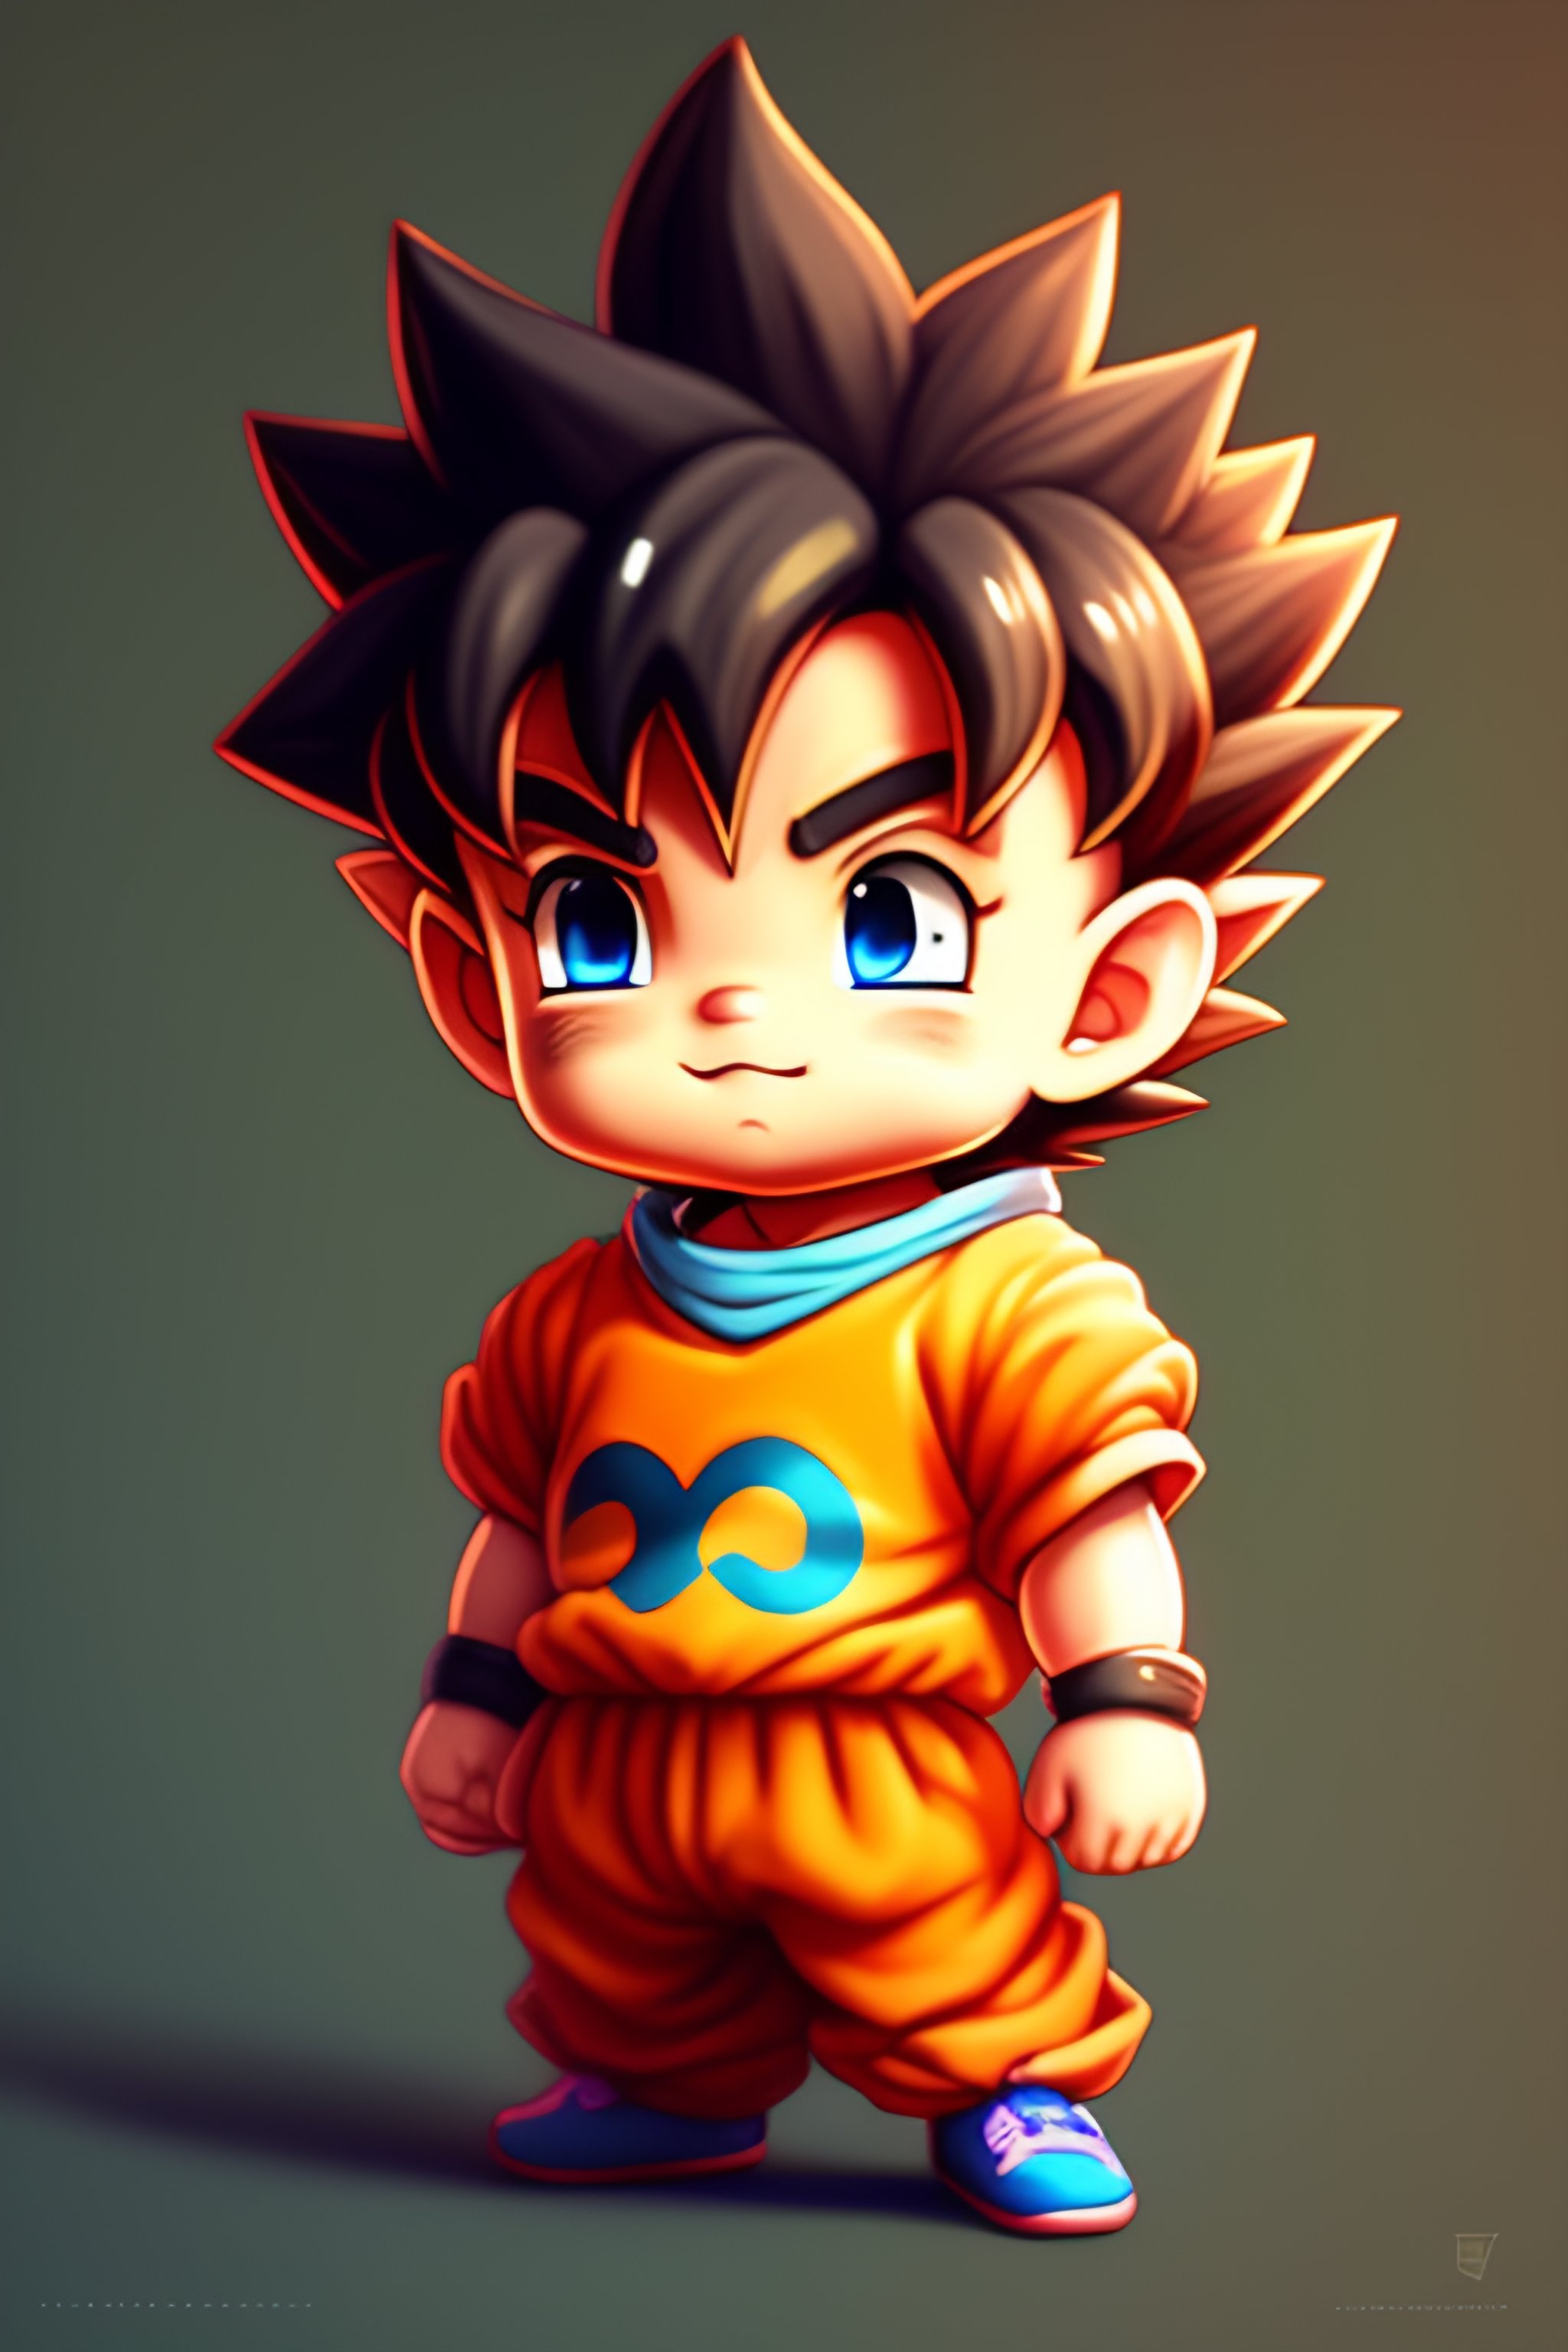 Cute Goku designs, themes, templates and downloadable graphic elements on  Dribbble